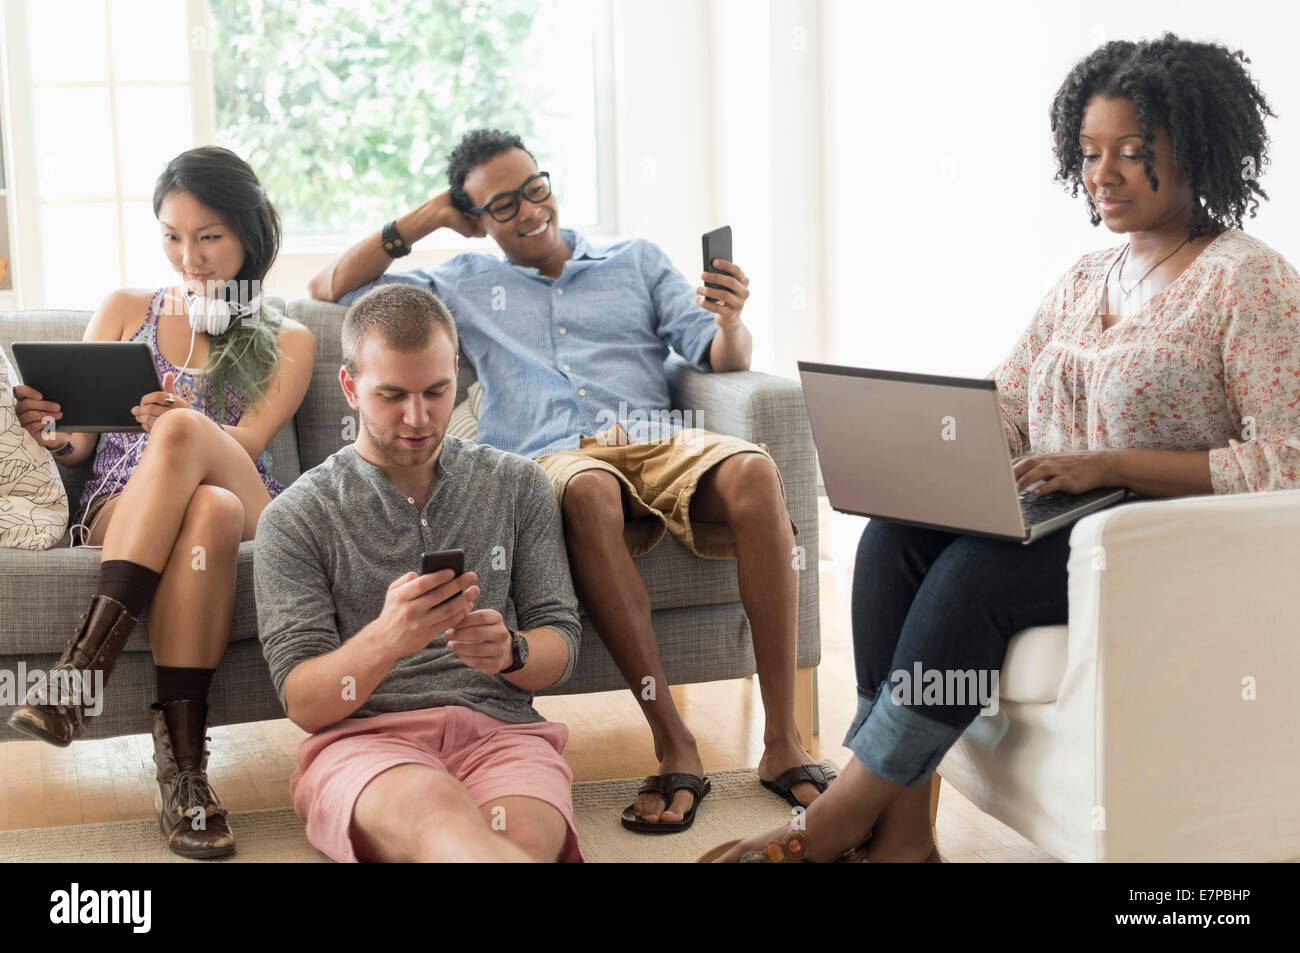 Friends hanging out in living room Stock Photo